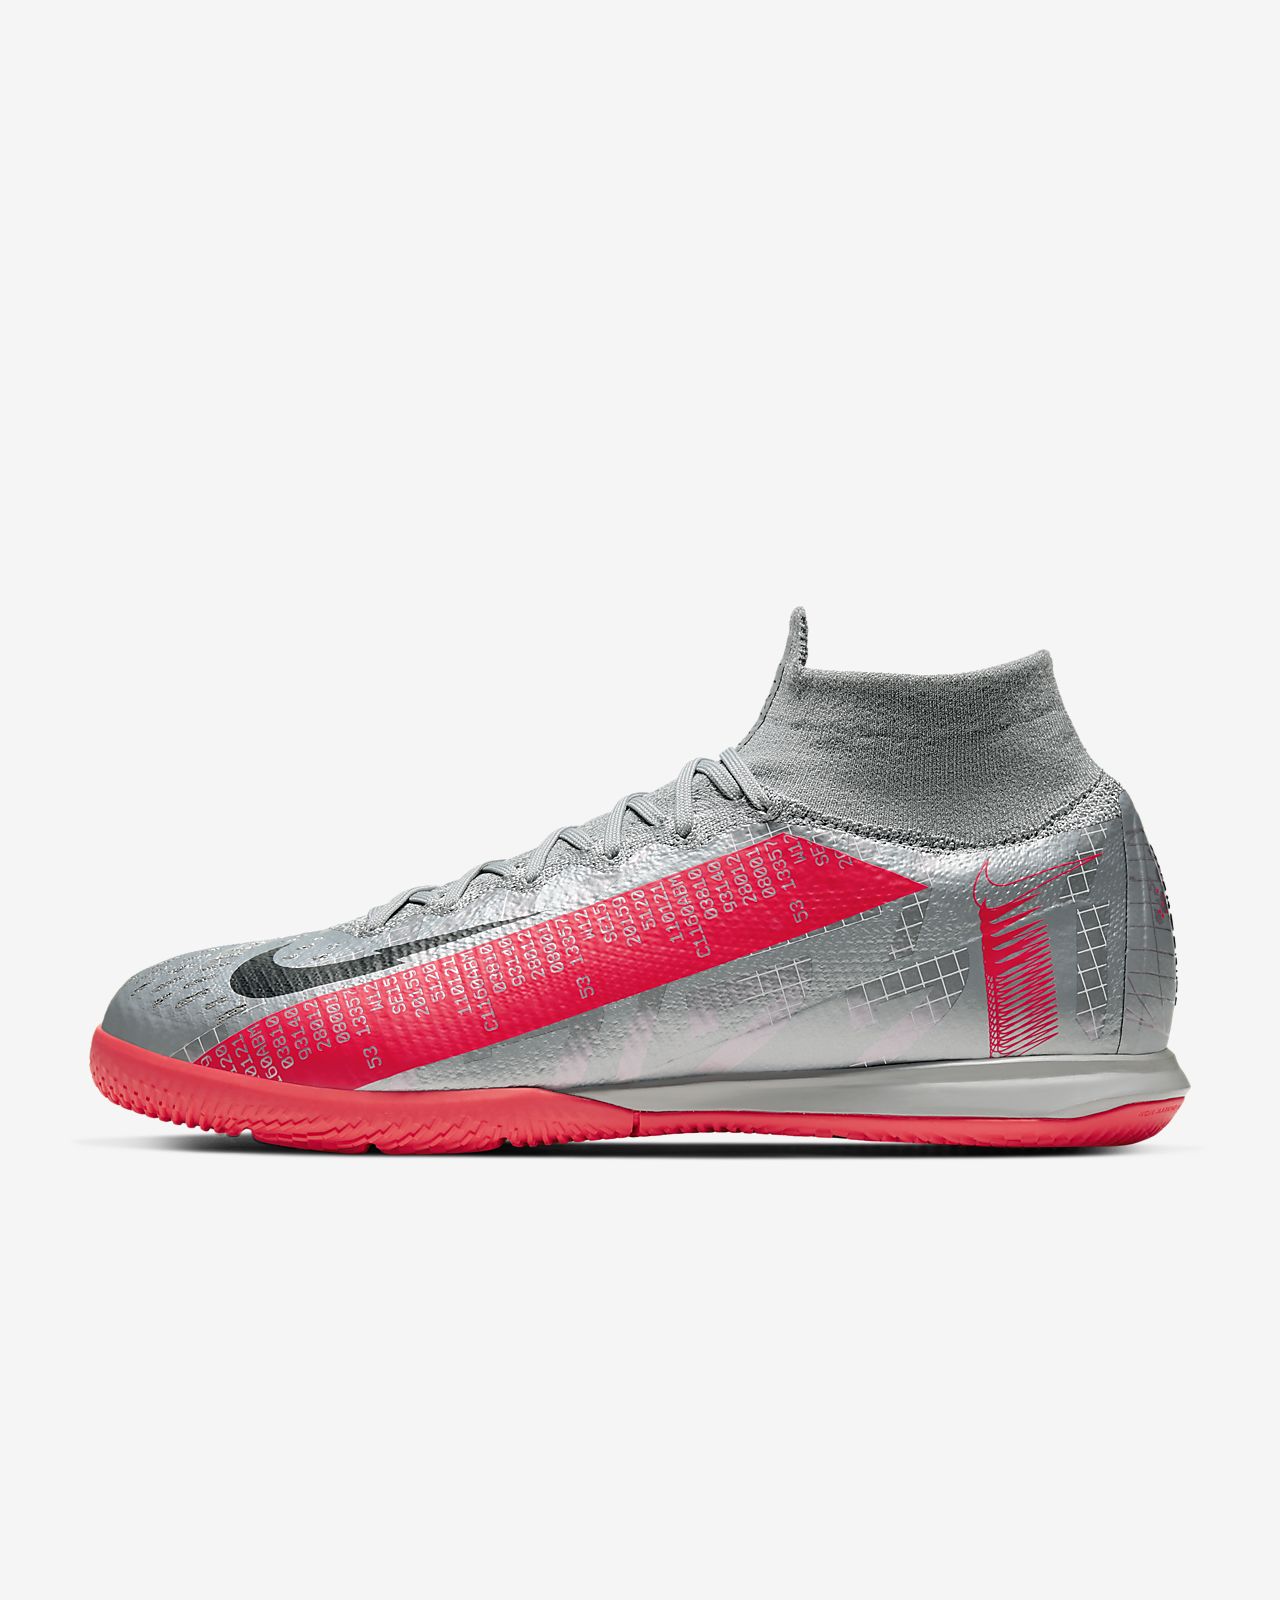 ANP Store 2019 Men 's Soccer Cleats Mercurial Superfly 7.